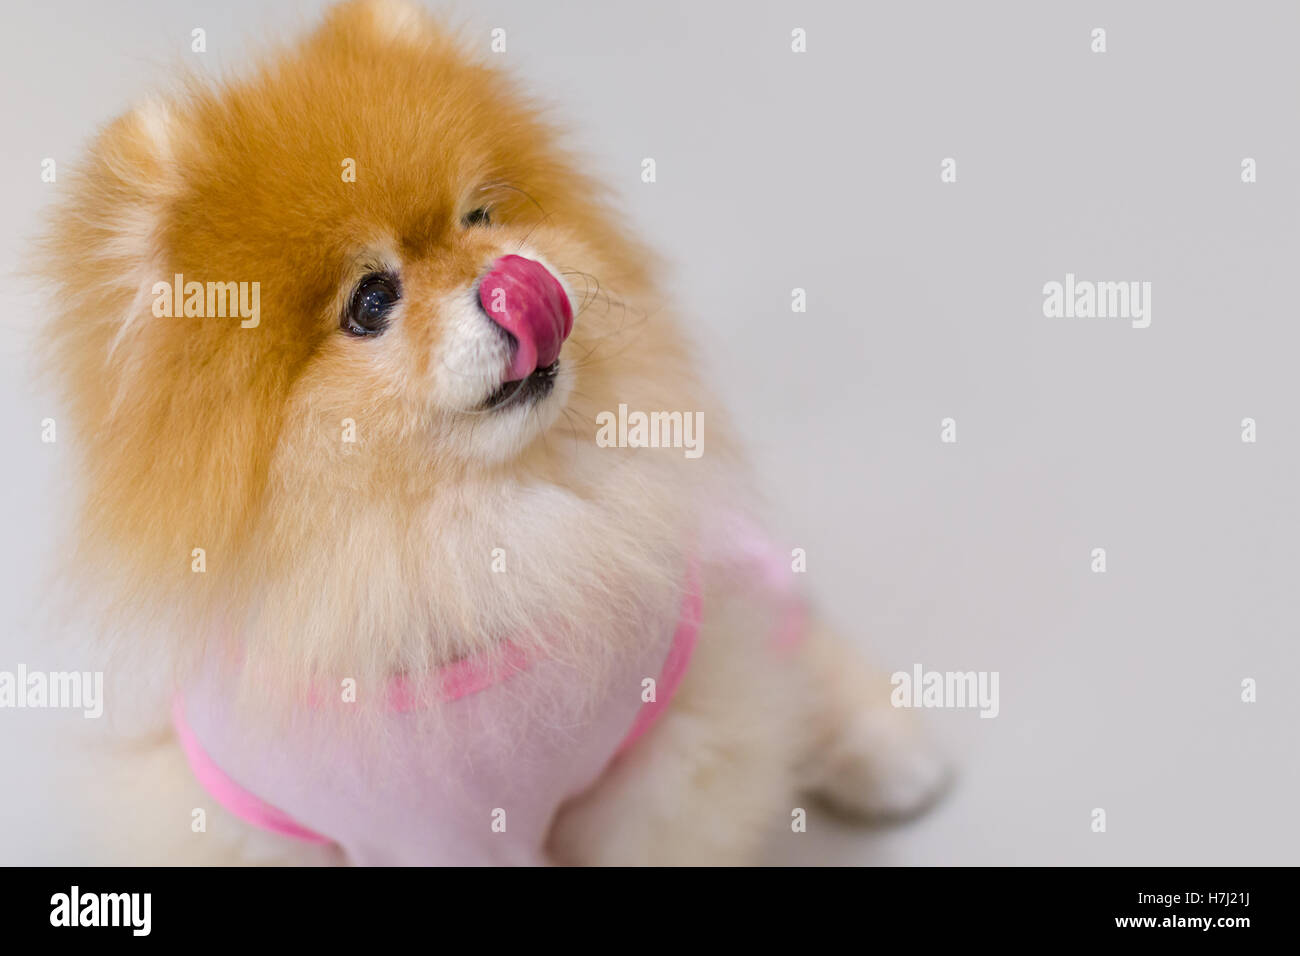 Little hungry Pomeranian dog sitting and sticking out tongue begging for food. Stock Photo